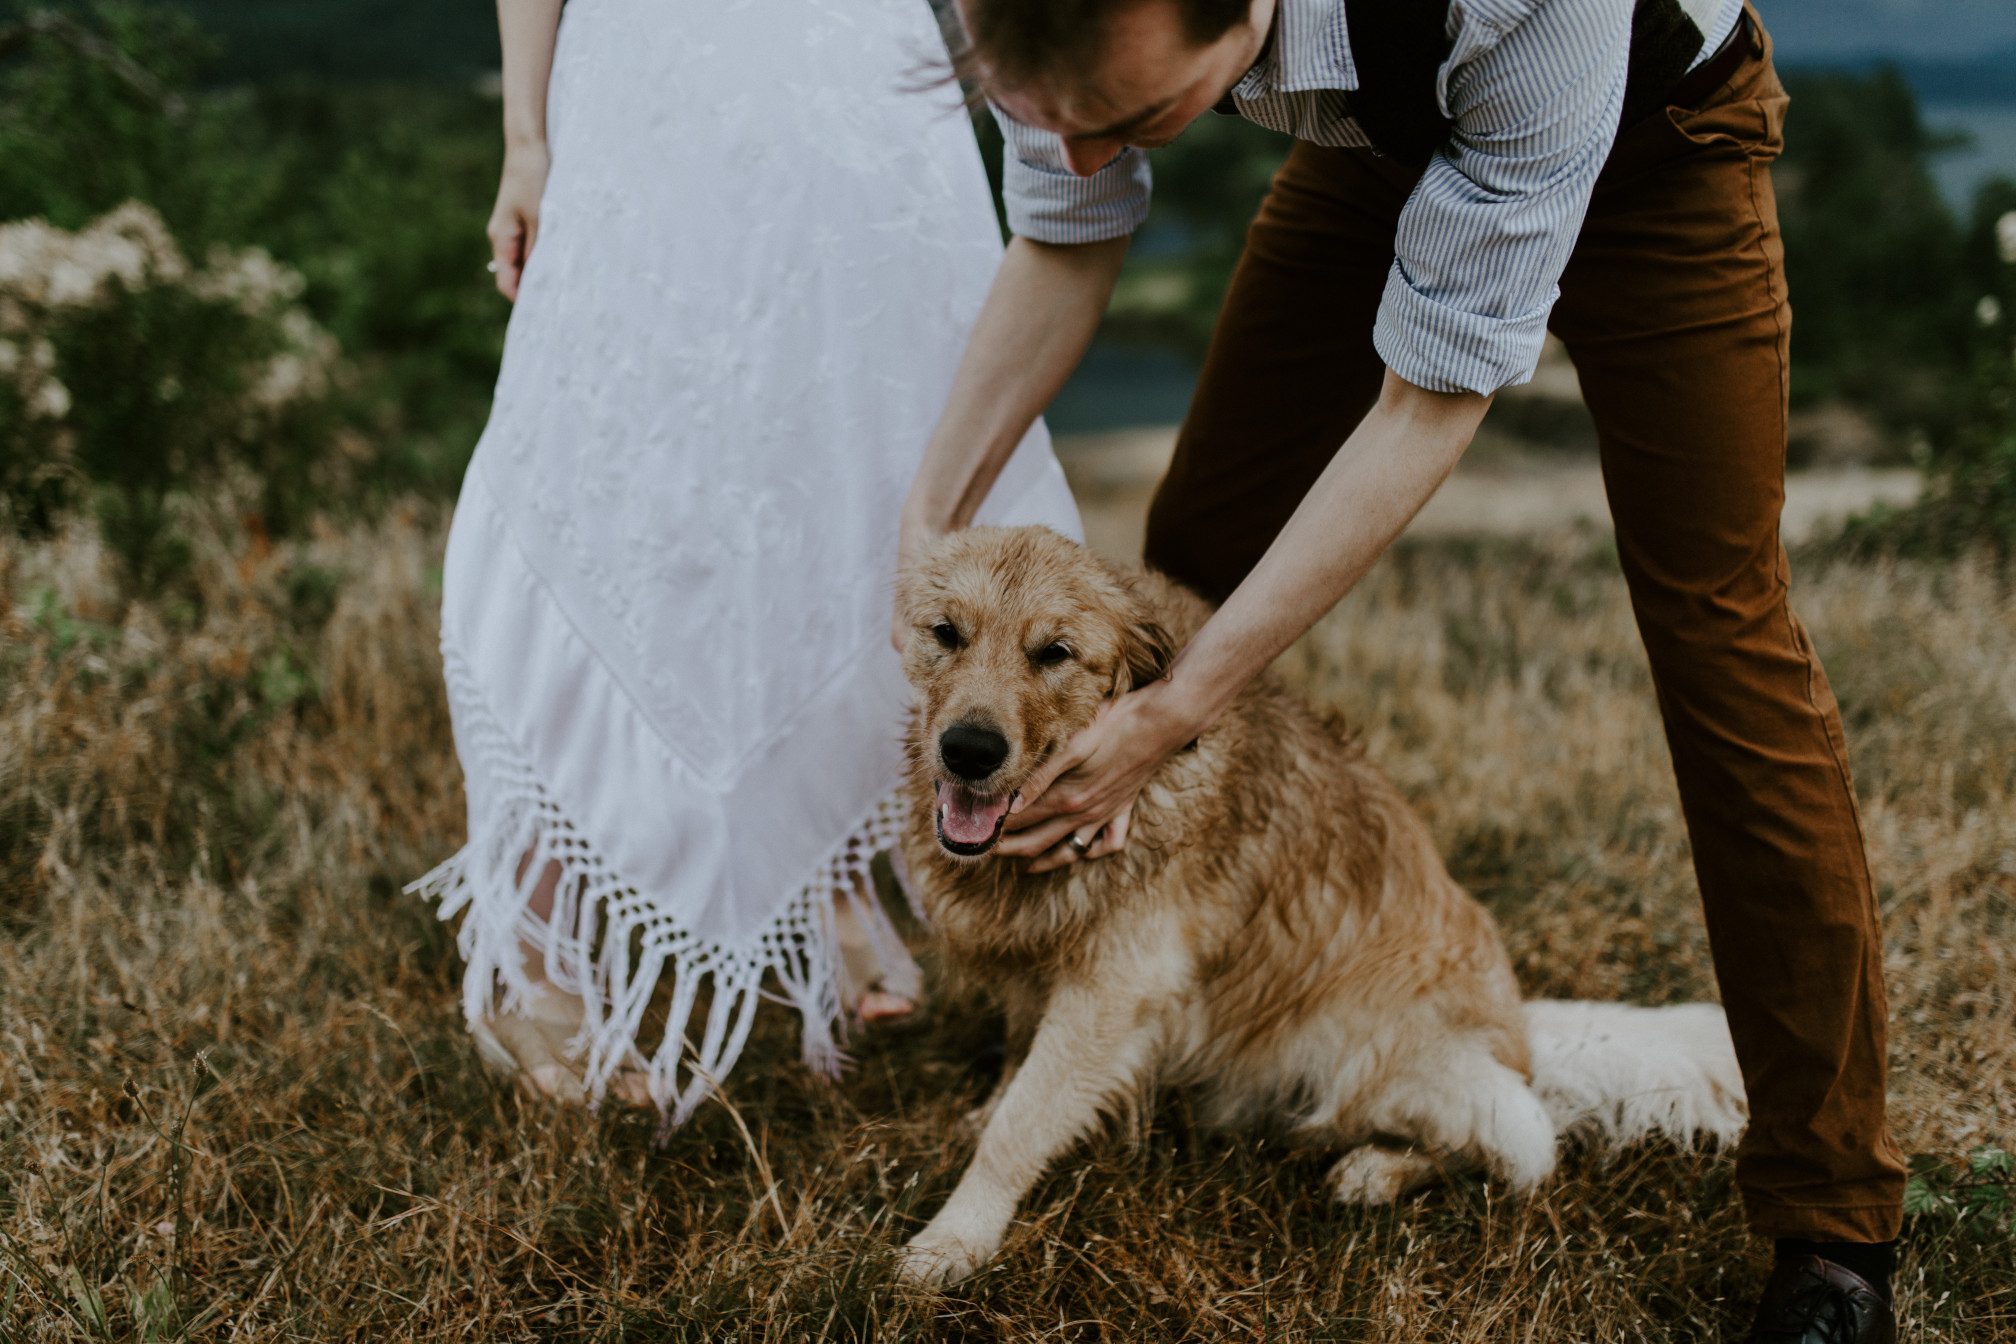 Jacob and Kimberlie have cody near their feet at Cascade Locks, OR. Elopement wedding photography at Cascade Locks by Sienna Plus Josh.